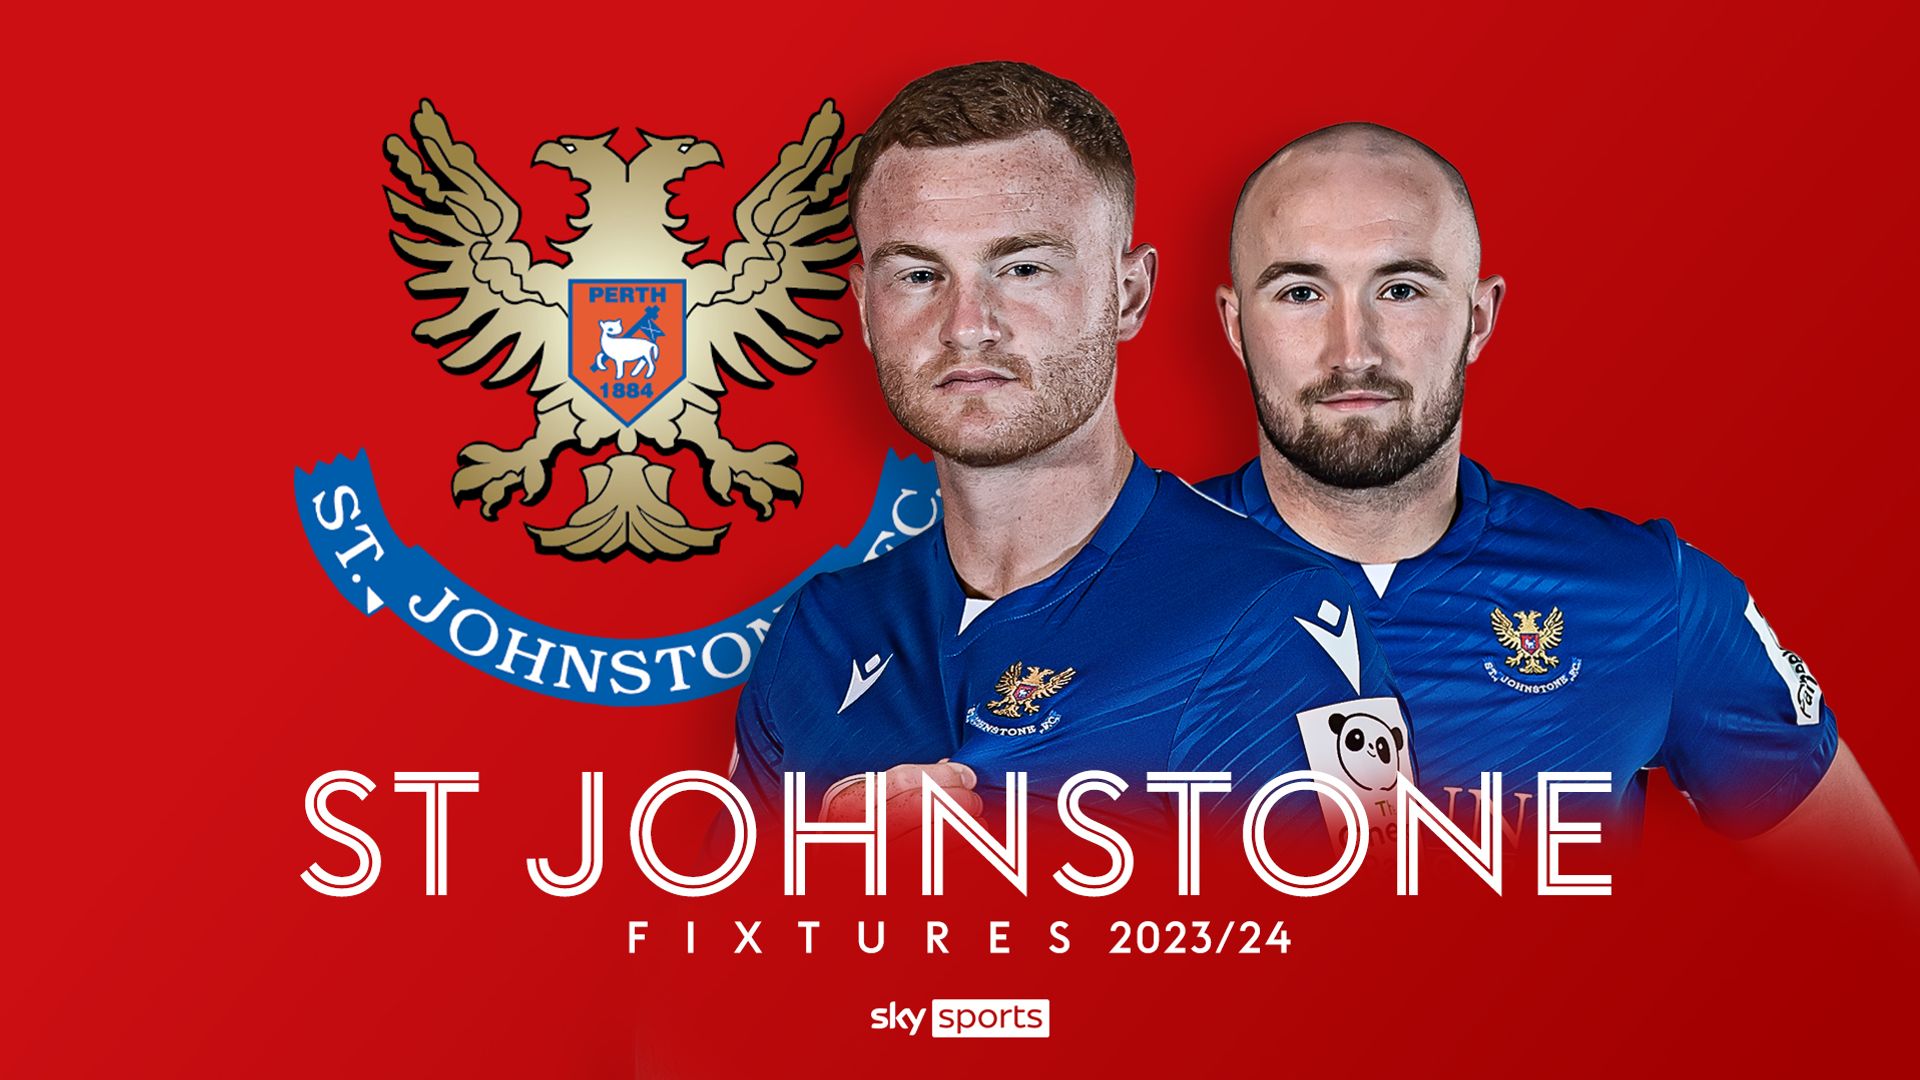 St Johnstone fixtures: MacLean's side start at home to against Hearts